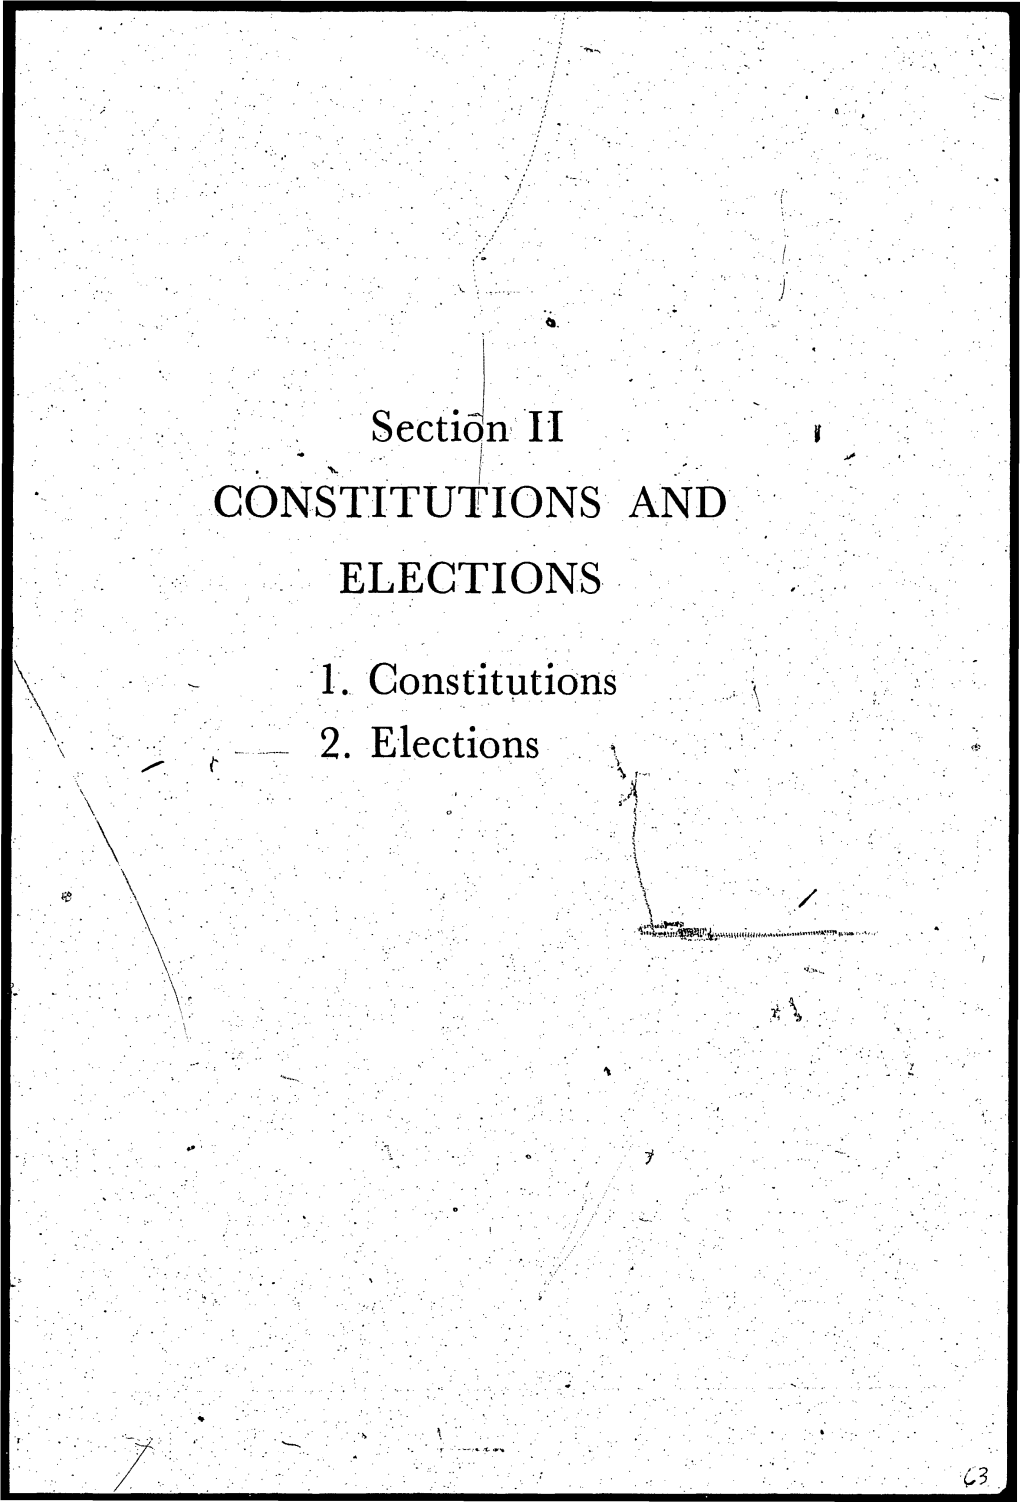 Constitutions and Elections